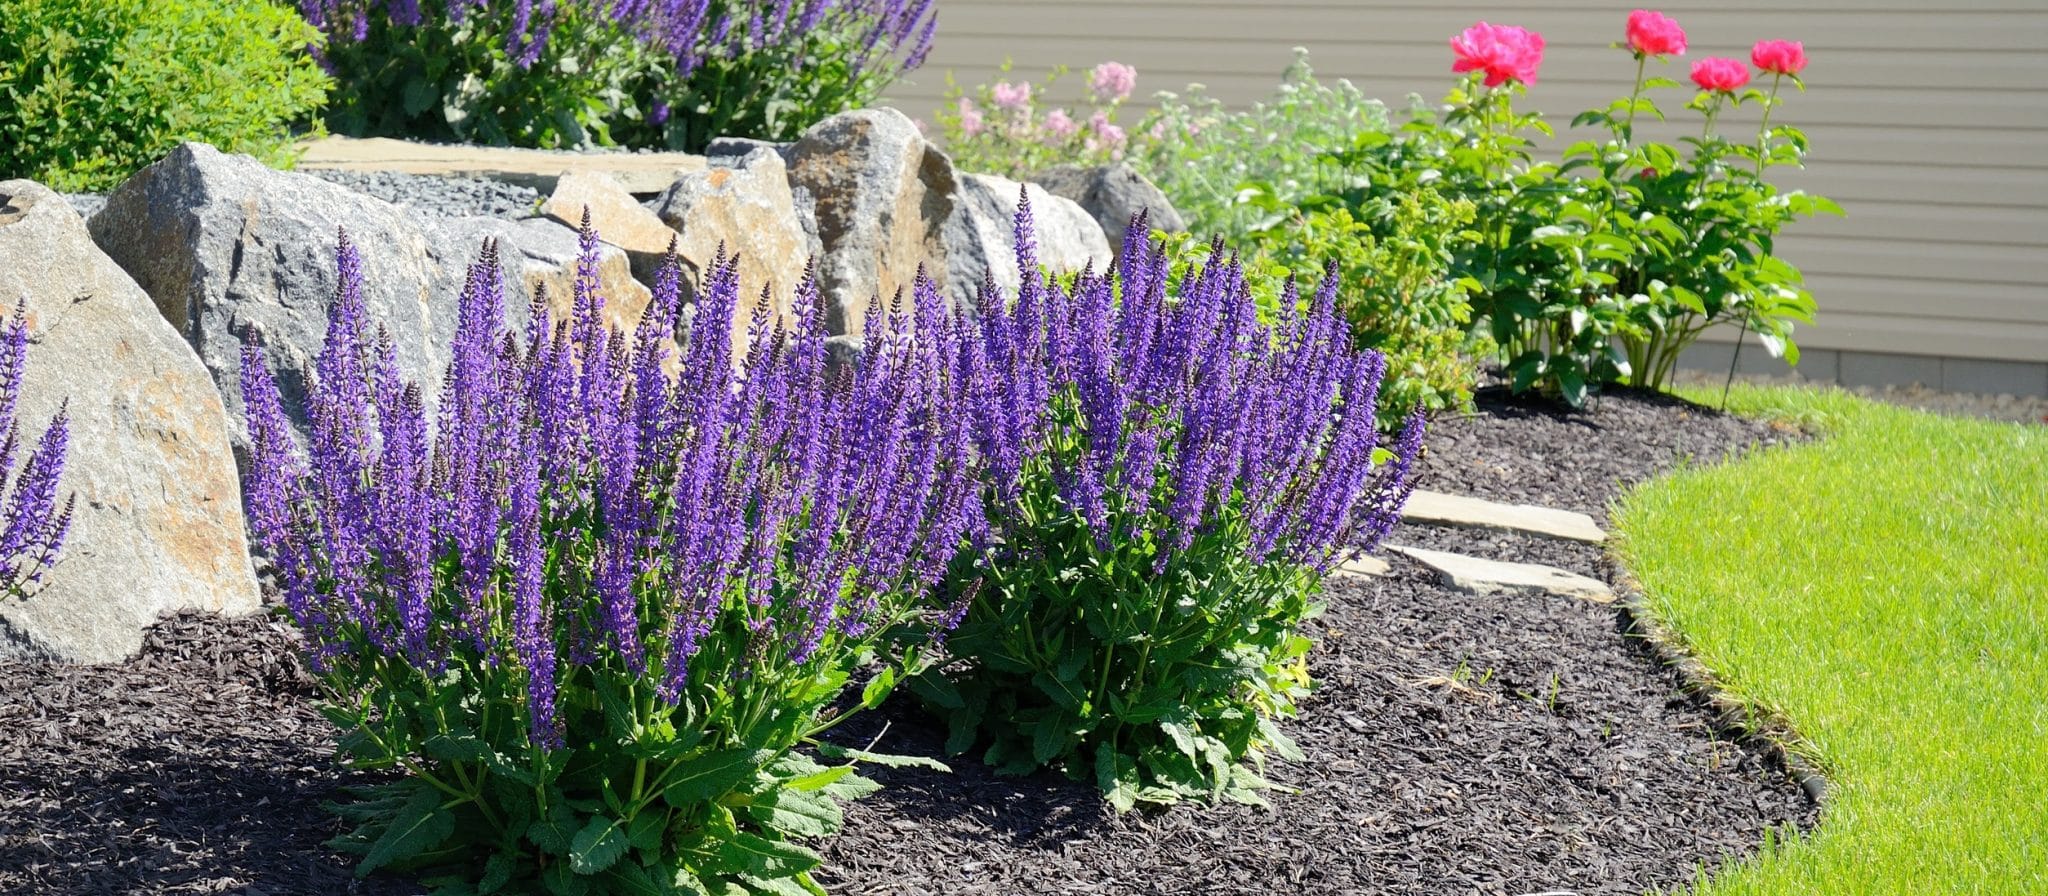 Salvia Flowers and Rock Retaining Wall at a Residential Home